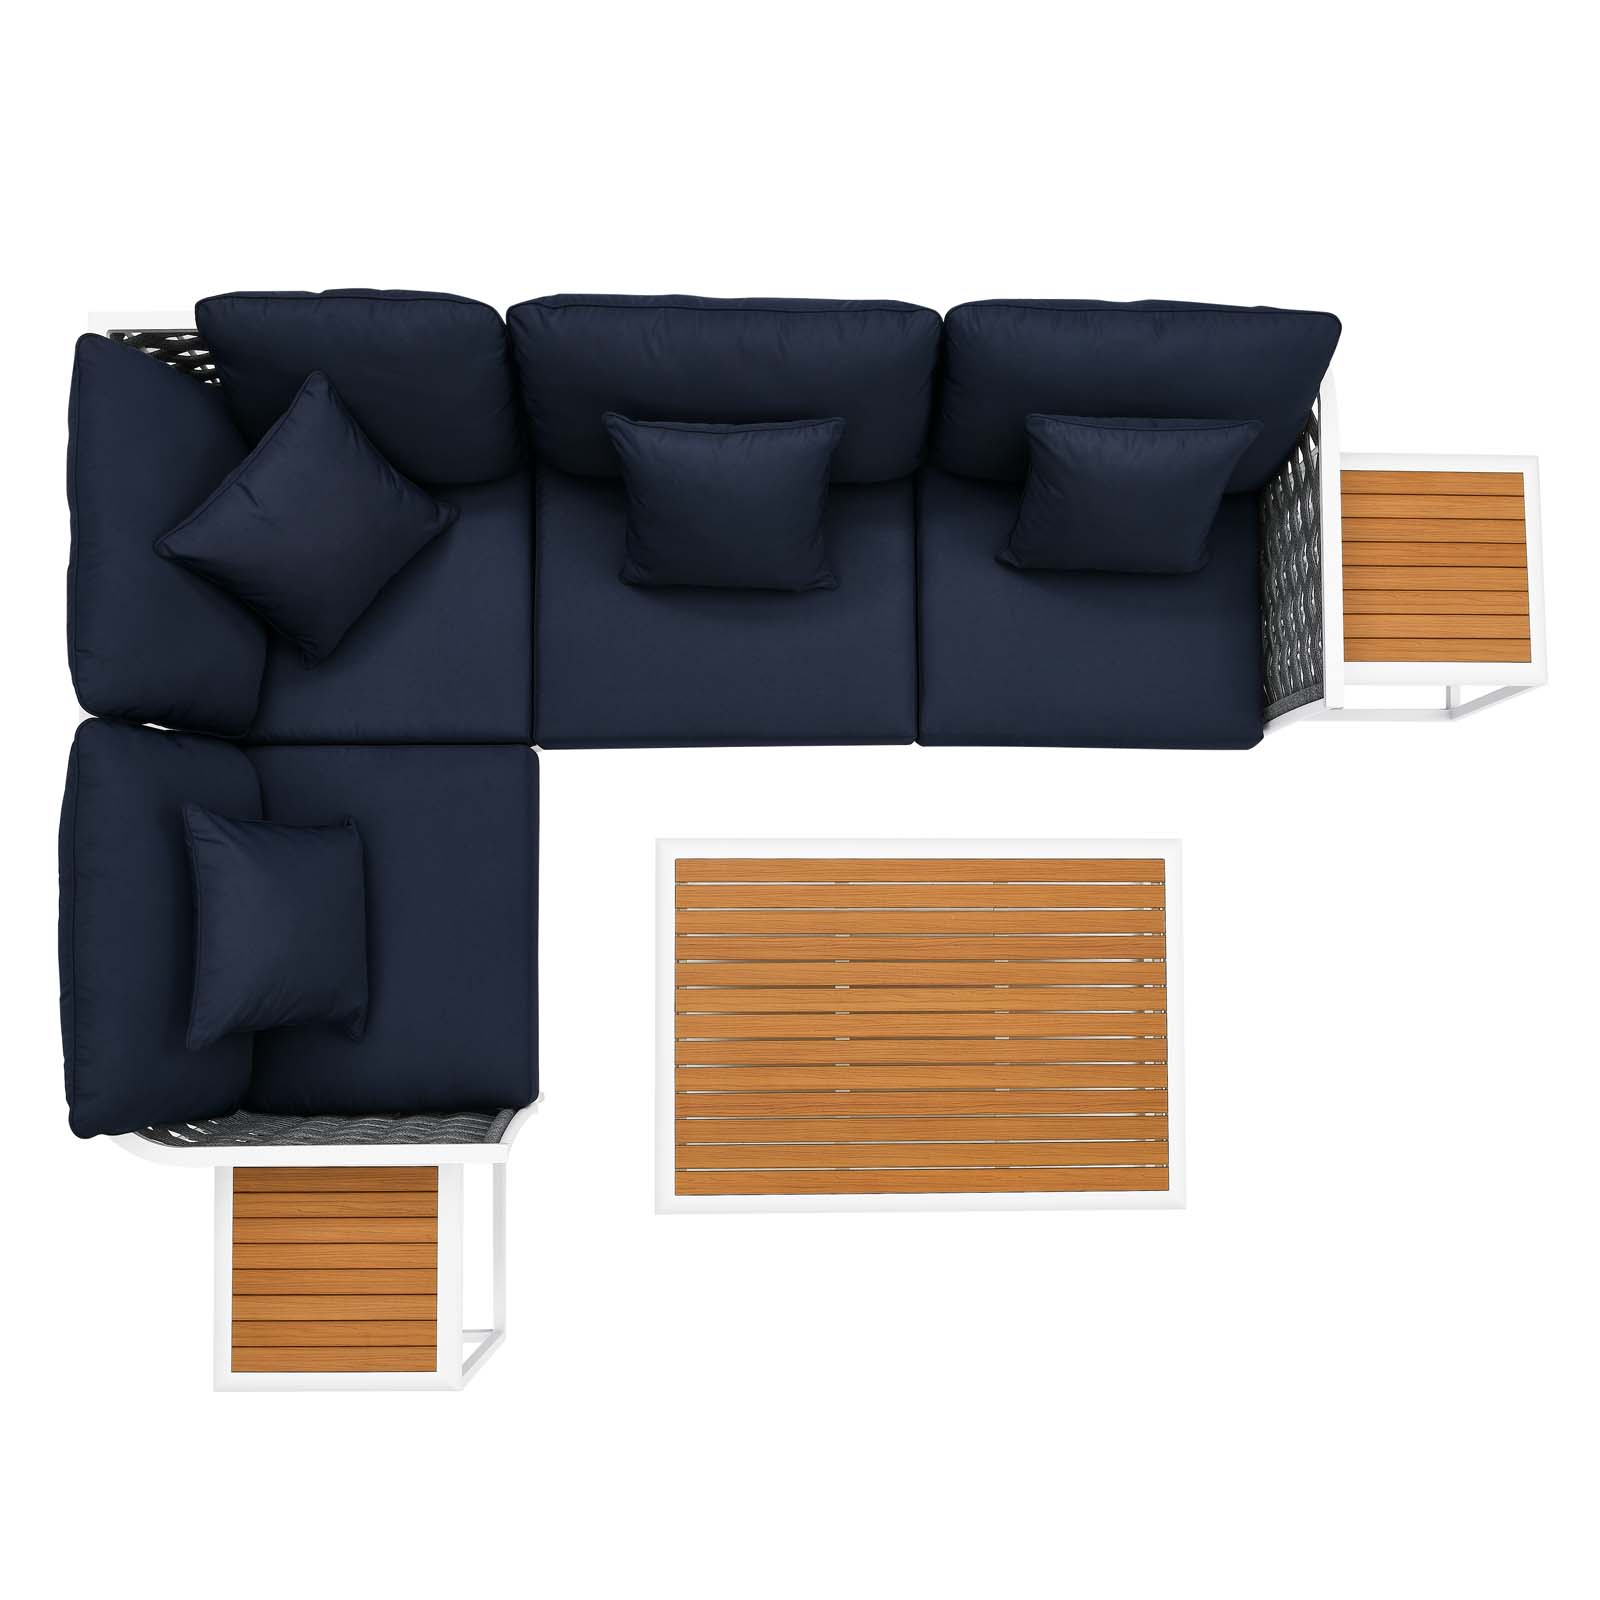 Lounge Sectional Sofa Chair Table Set, Navy White, Aluminum, Metal, Fabric, Modern Contemporary, Outdoor Patio Balcony Cafe Bistro Garden Furniture Hotel Hospitality - image 5 of 10